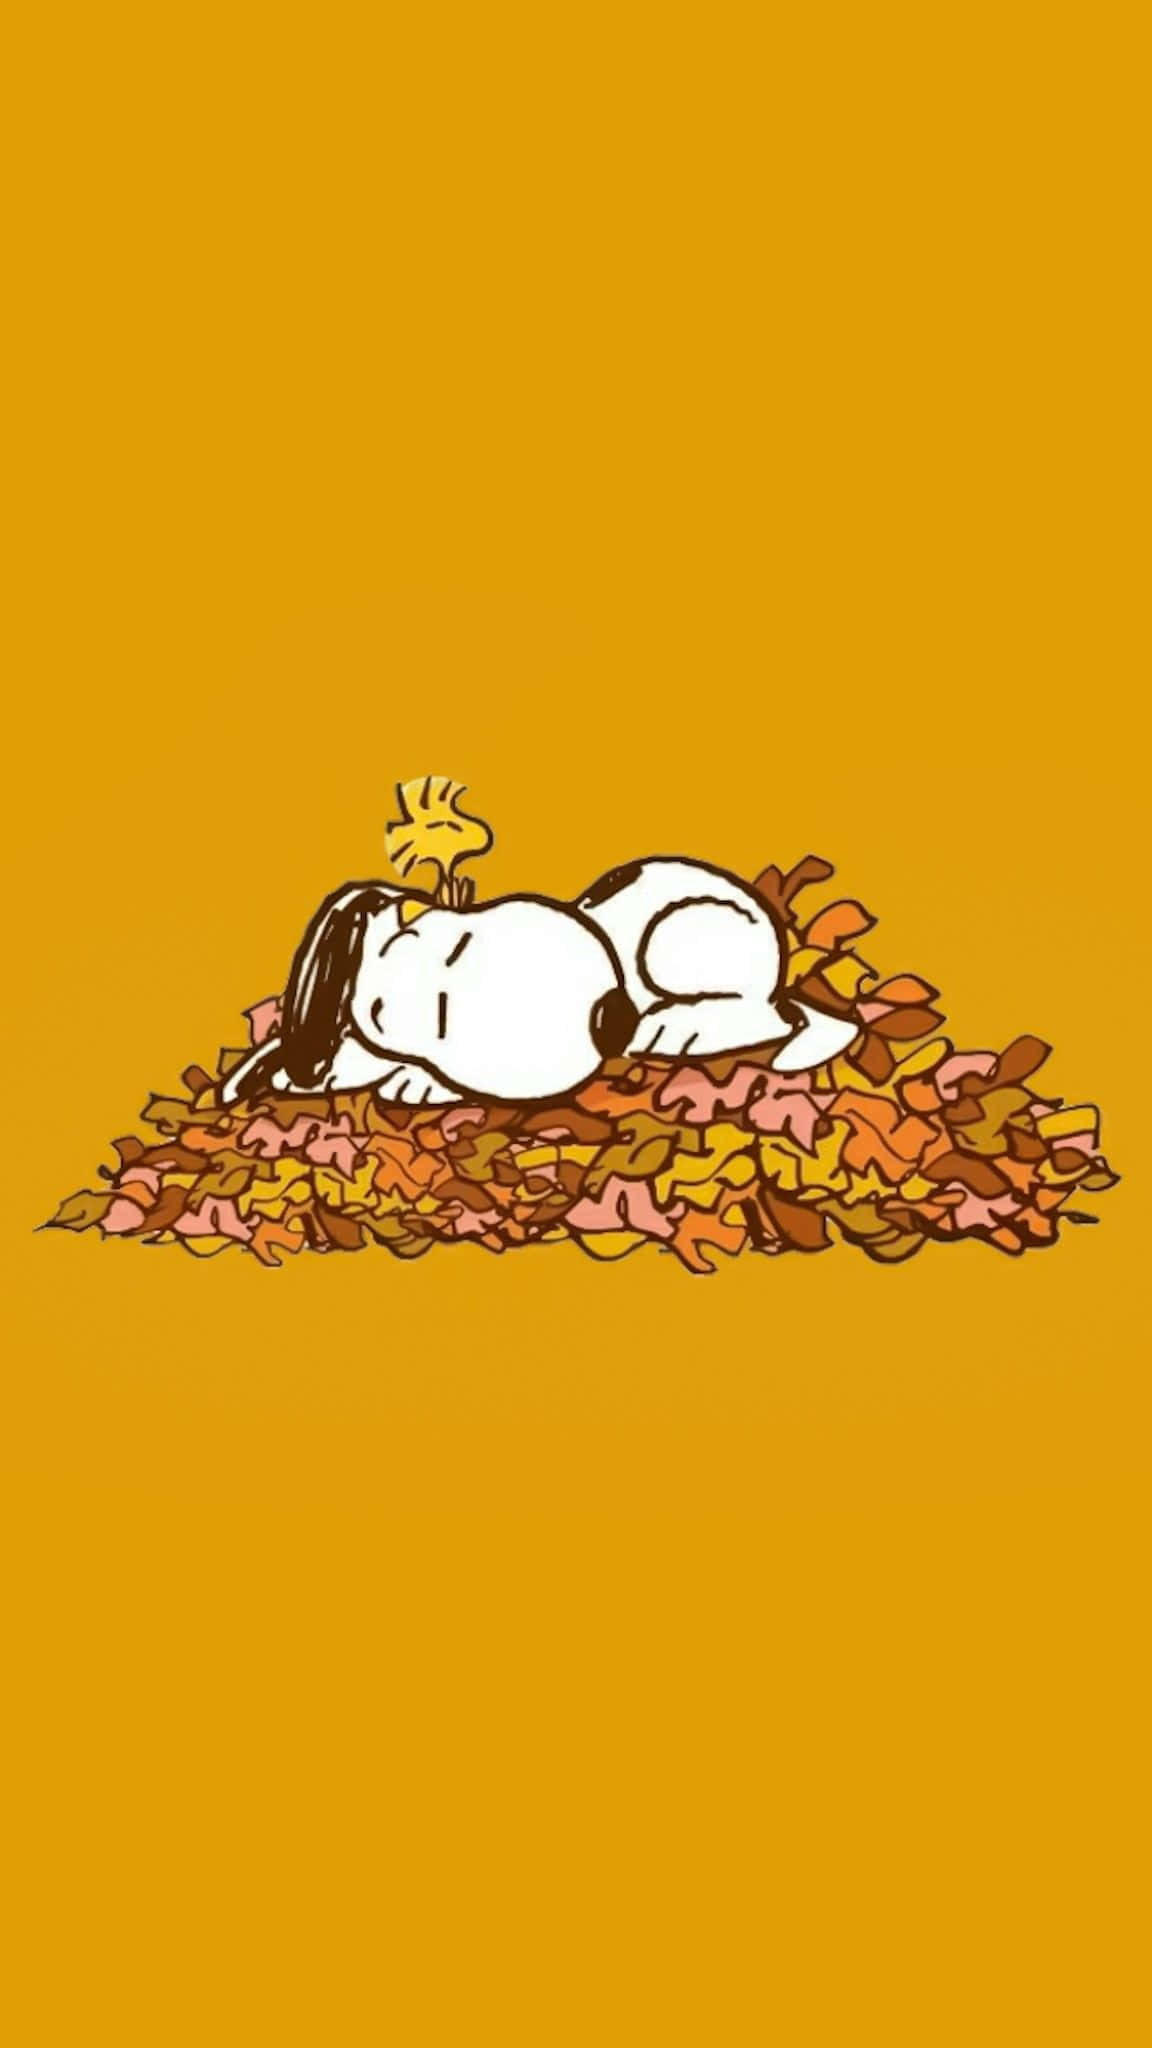 Snoopy Taking a Breather Wallpaper